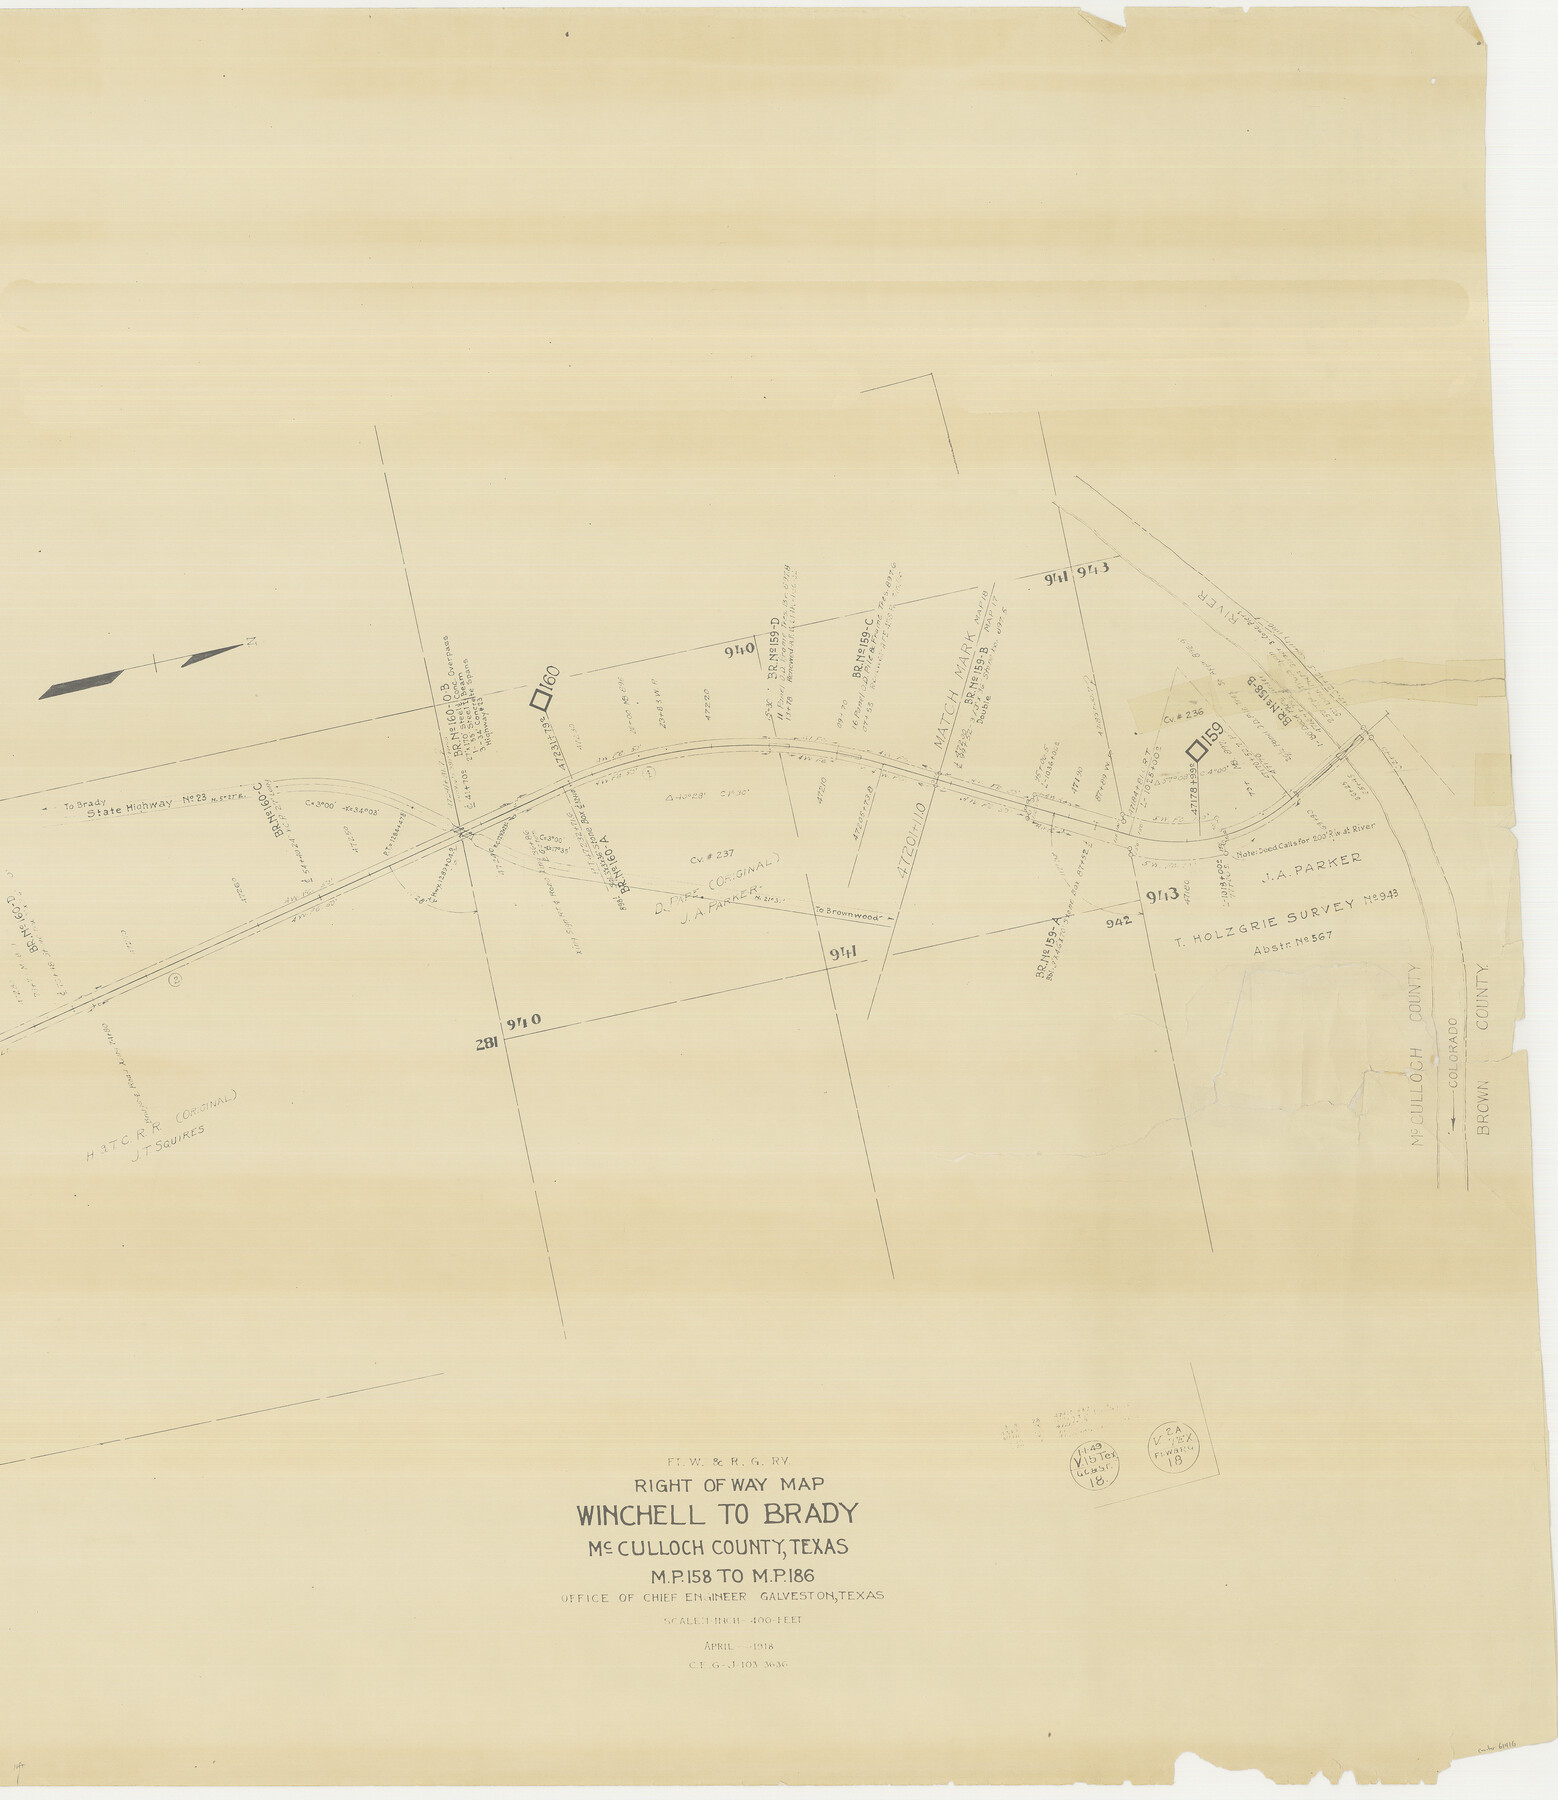 61416, FT. W. & R. G. Ry. Right of Way Map, Winchell to Brady, McCulloch County, Texas, General Map Collection